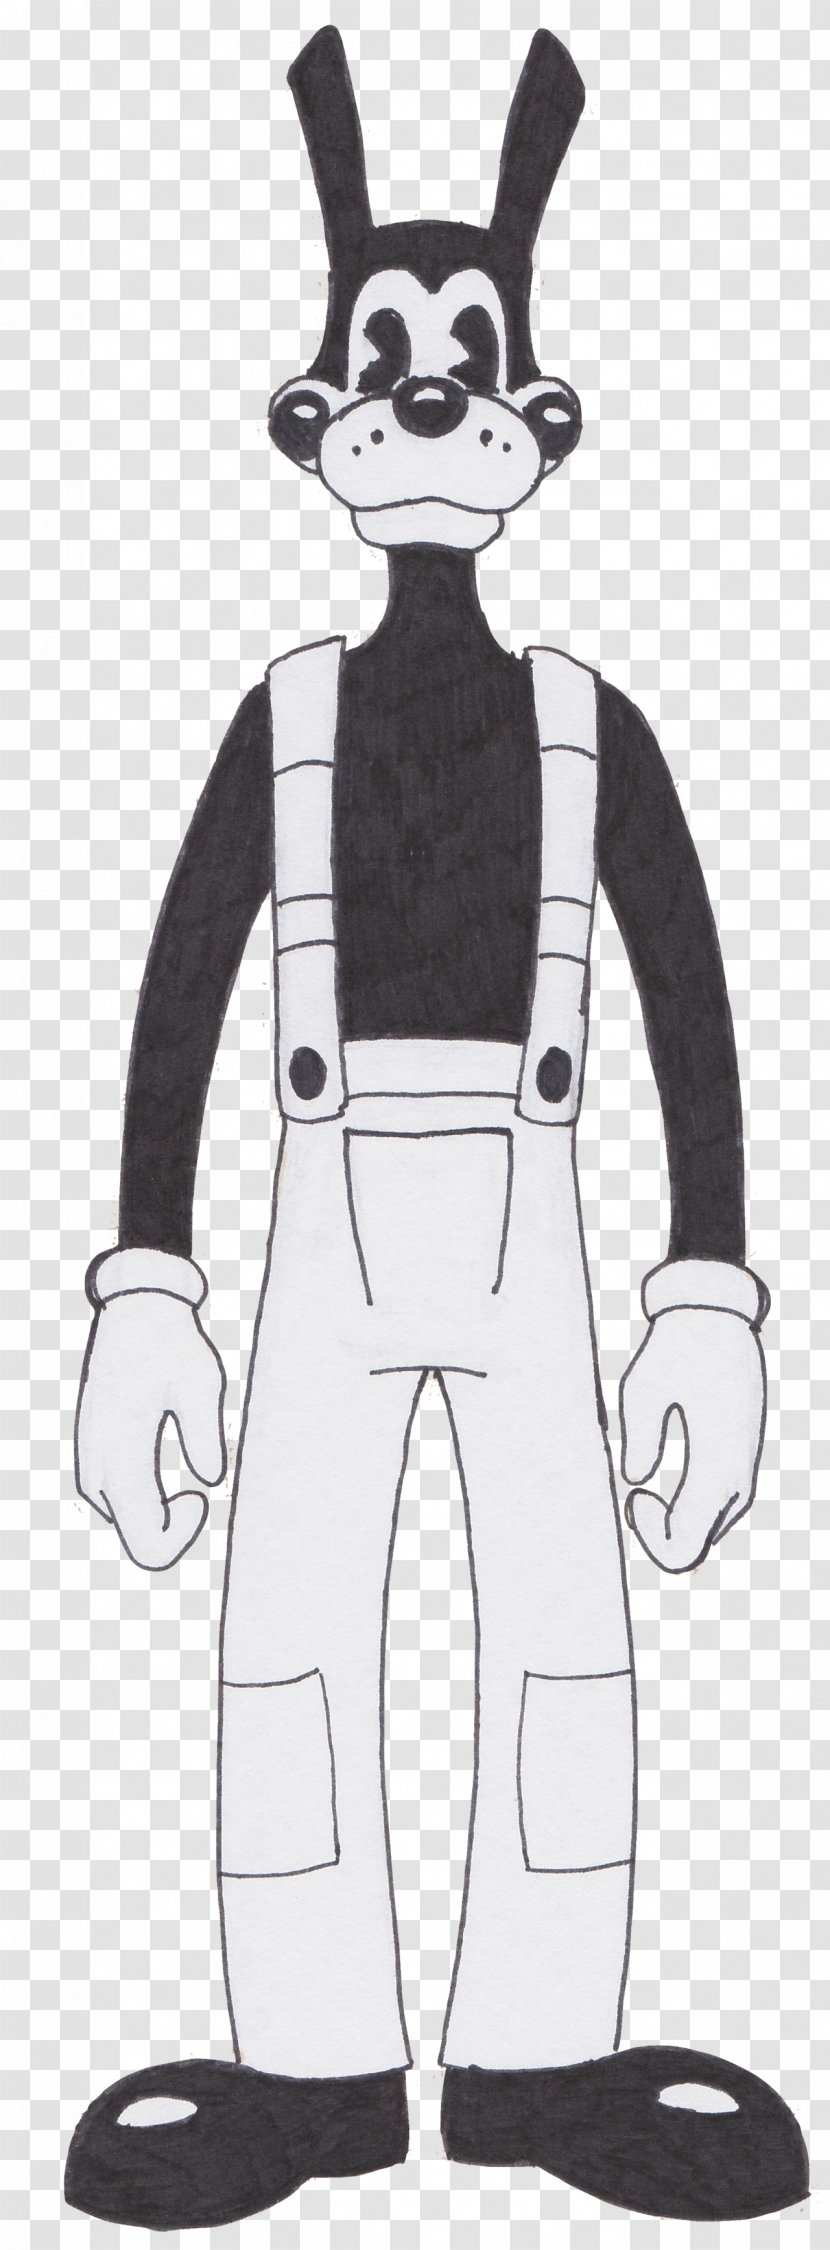 Gray Wolf Rabbit Drawing - Costume Design Transparent PNG